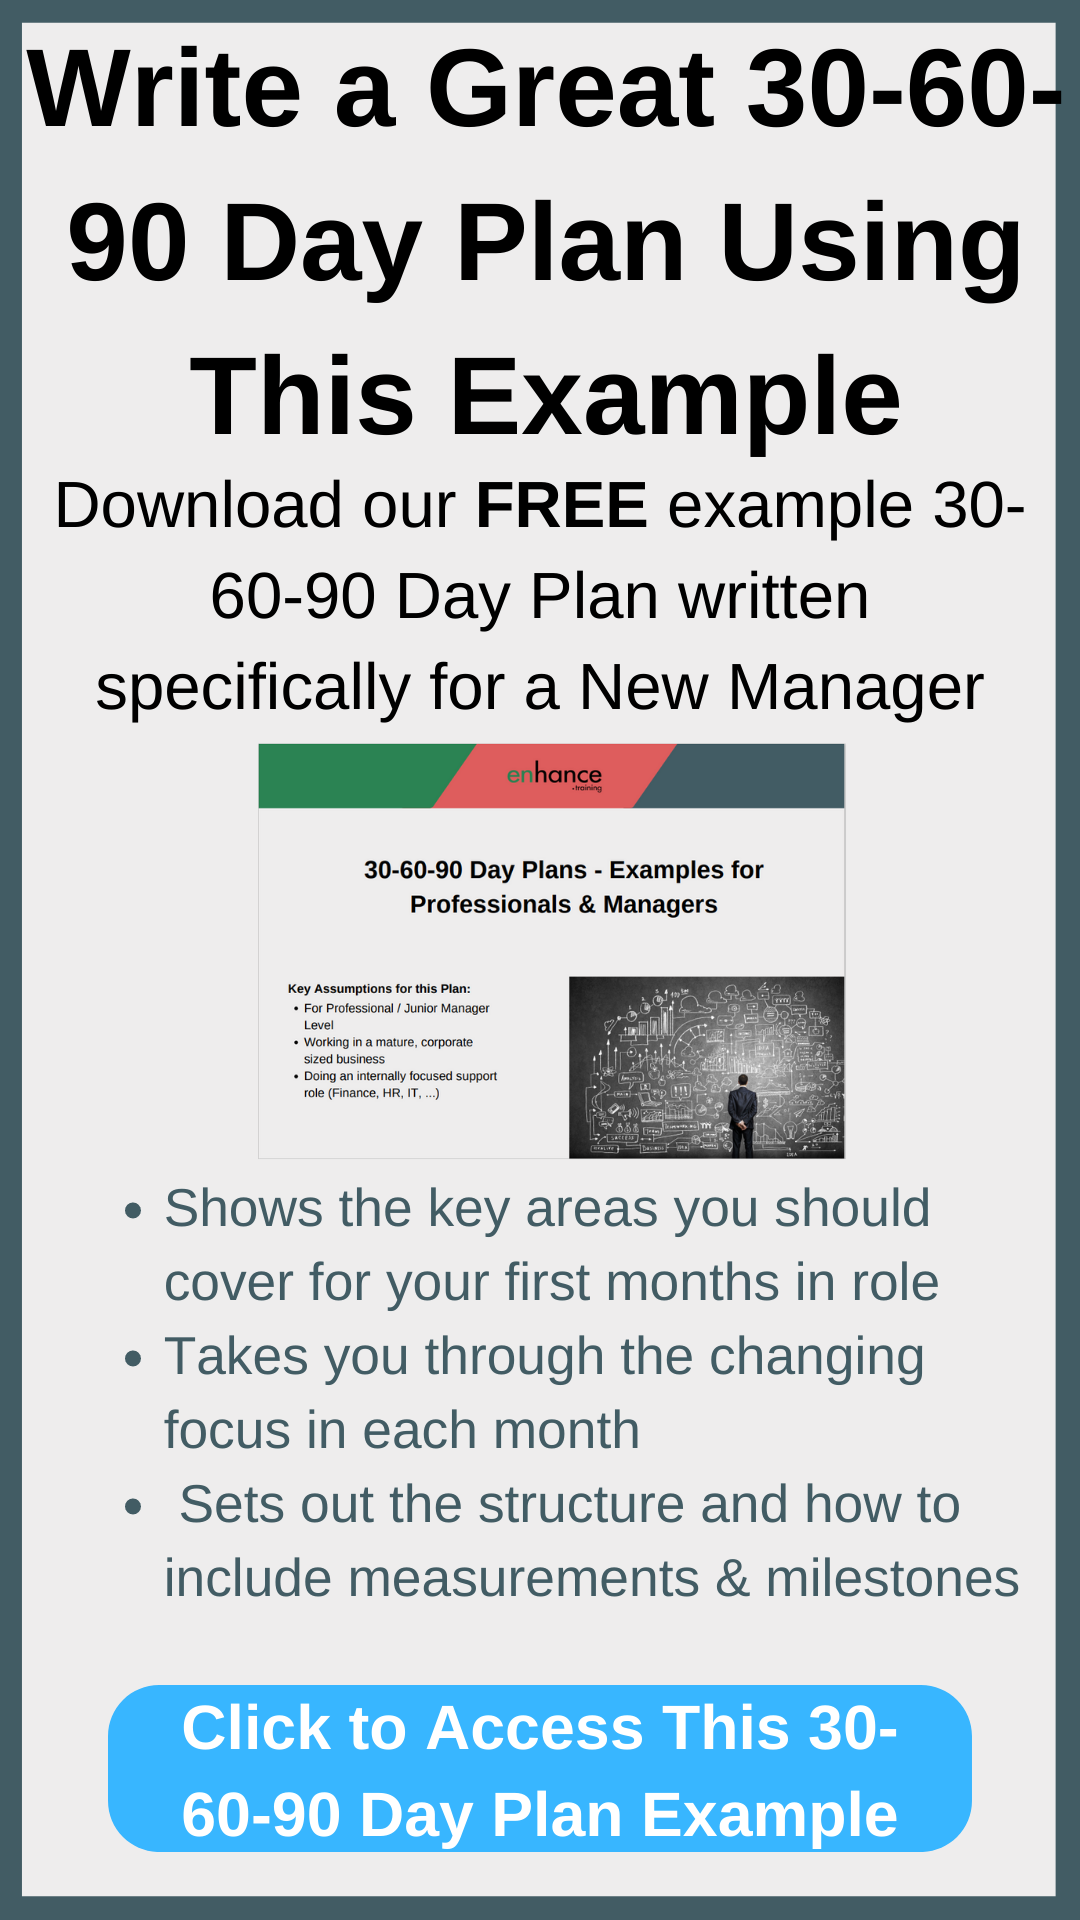 30-60-90 Day Plans - Example advert